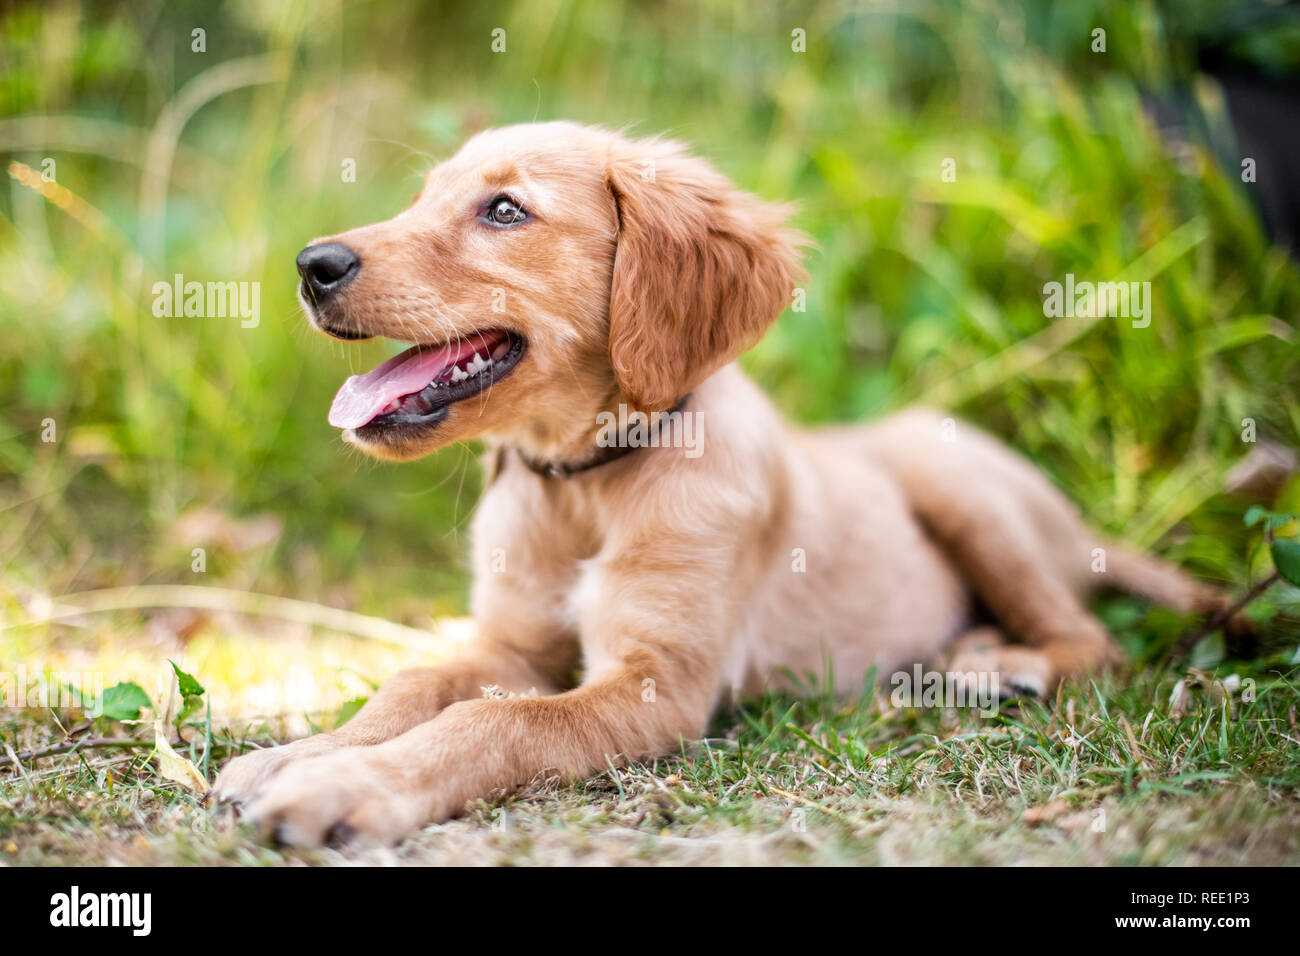 A Golden Retriever puppy lying in rough grass with its mouth open and tongue out looking to the side wearing a leather collar. Stock Photo